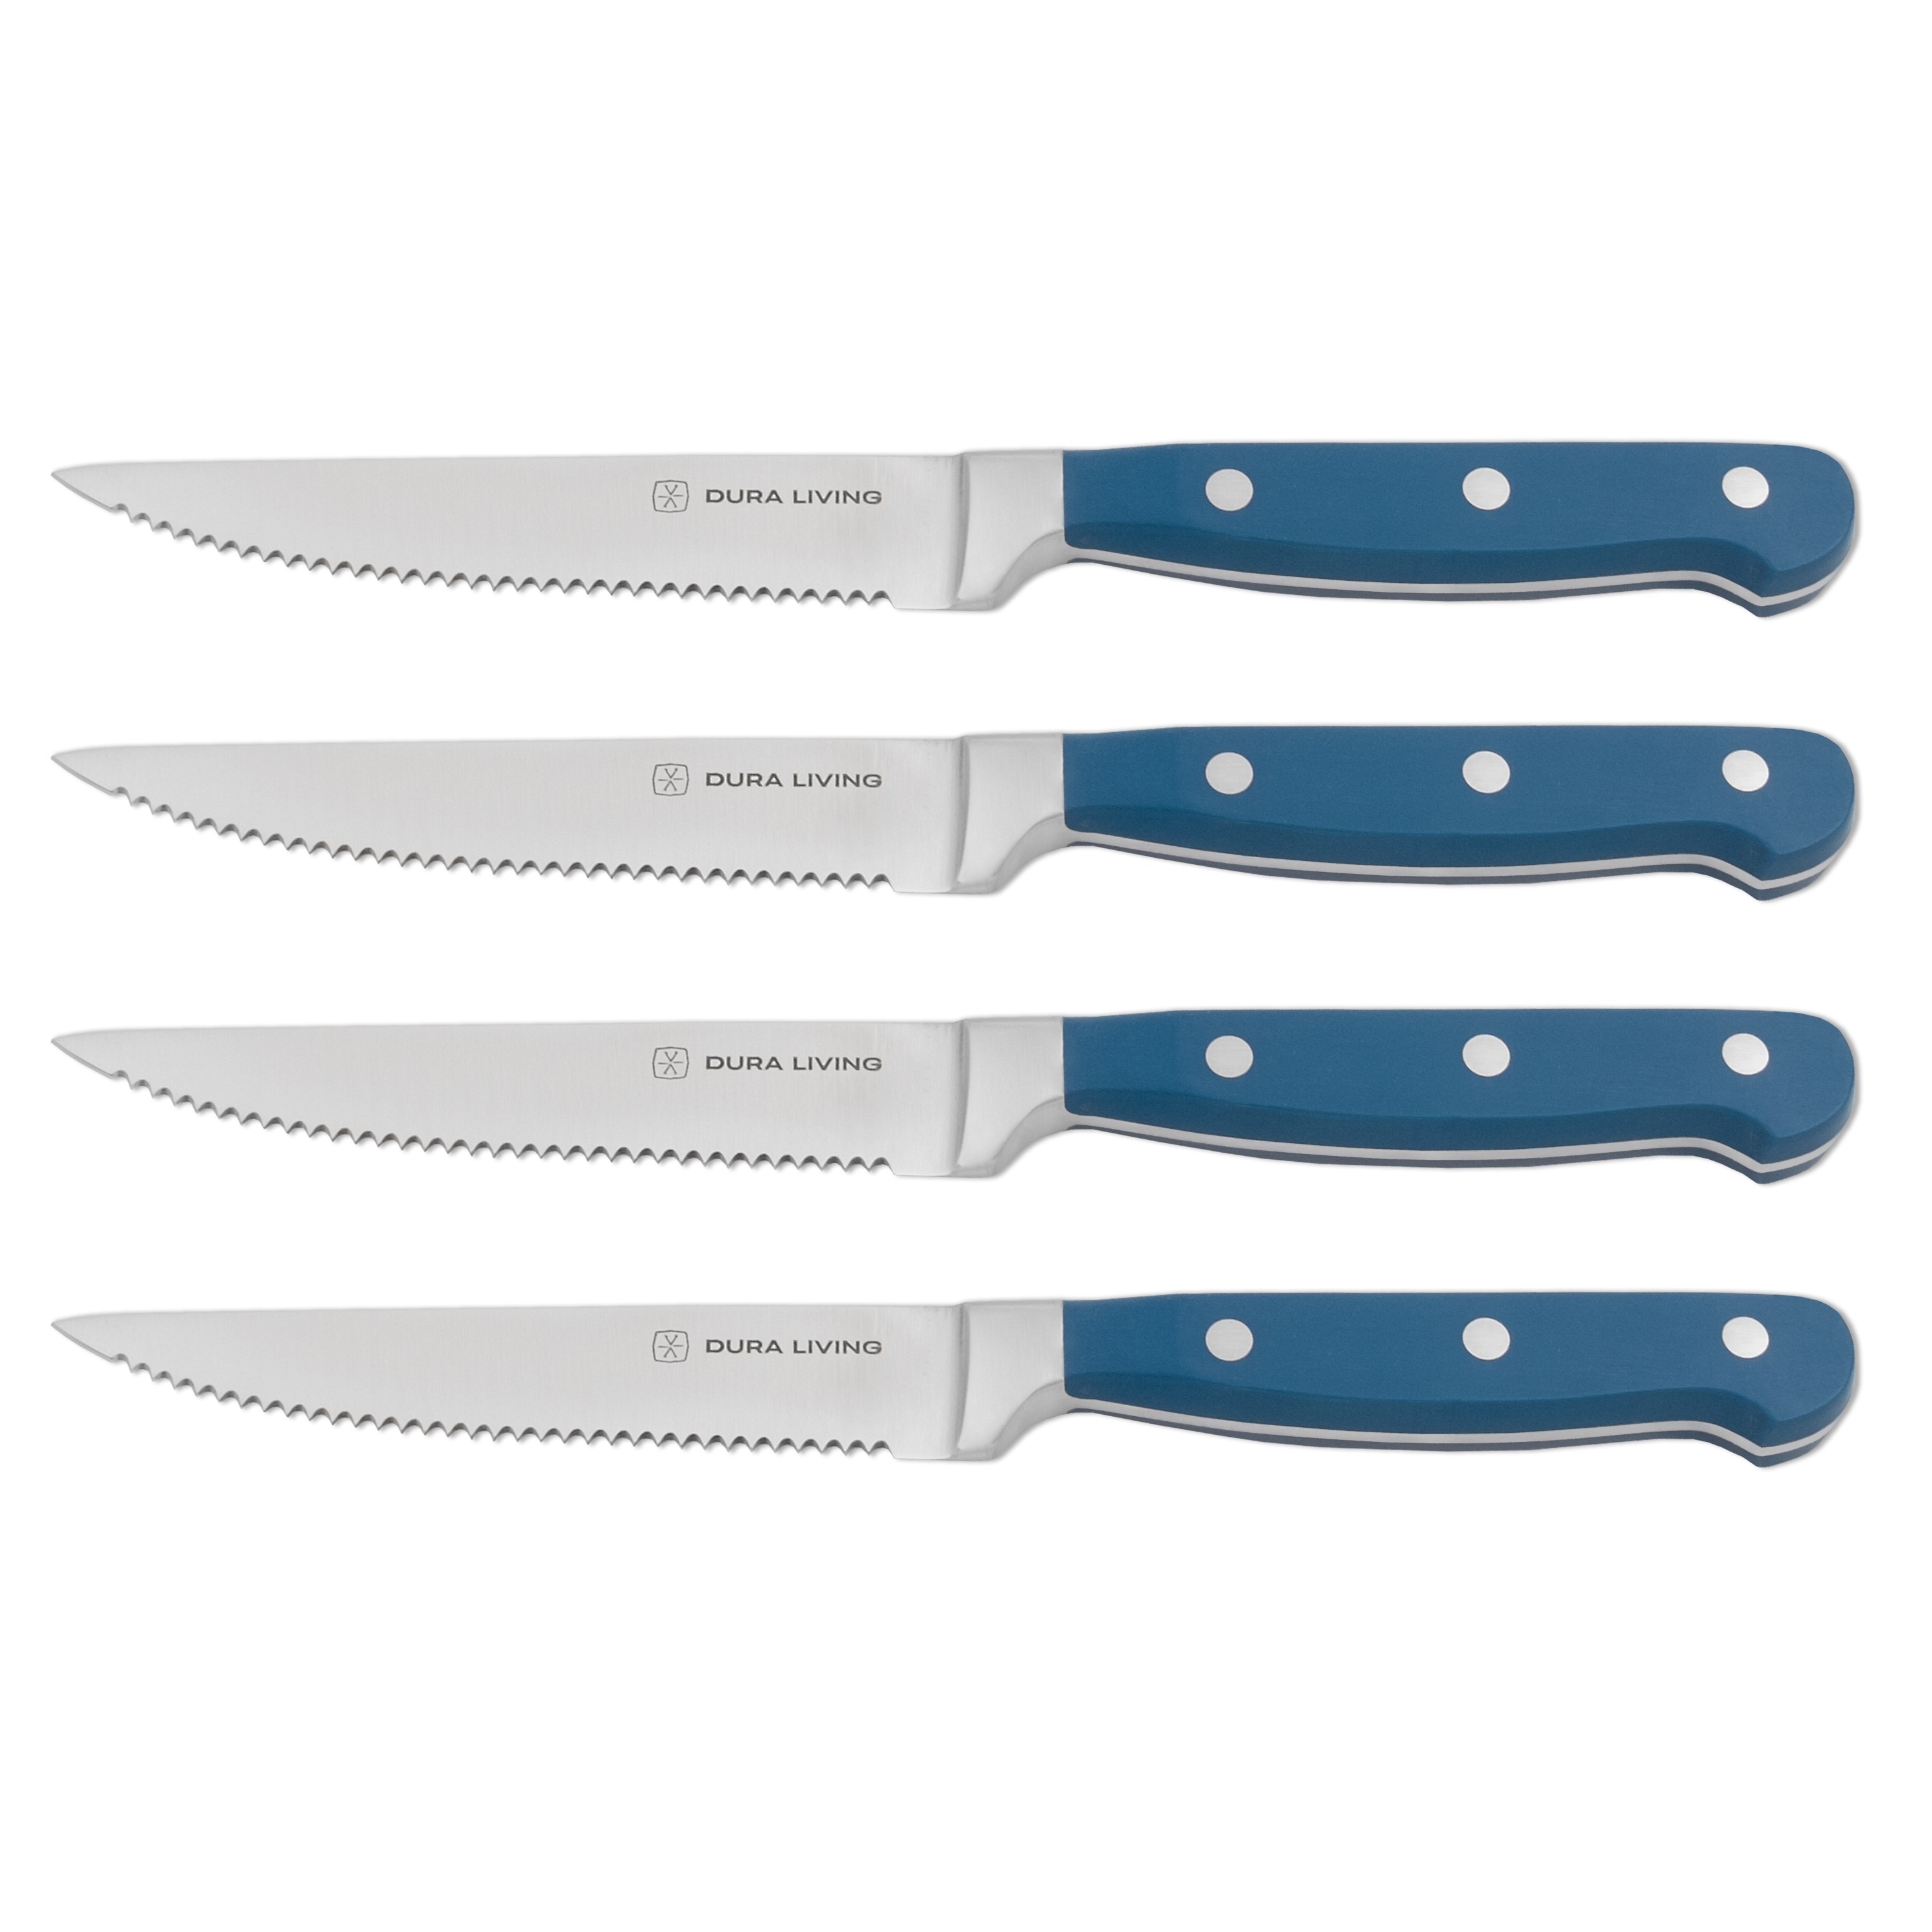 https://ak1.ostkcdn.com/images/products/is/images/direct/ed13adfe3c9b751b696855ee37f29e1529731dc1/Dura-Living-Superior-Steak-Knife-Set-of-8---Forged-Stainless-Steel-Serrated-Blades%2C-Black.jpg